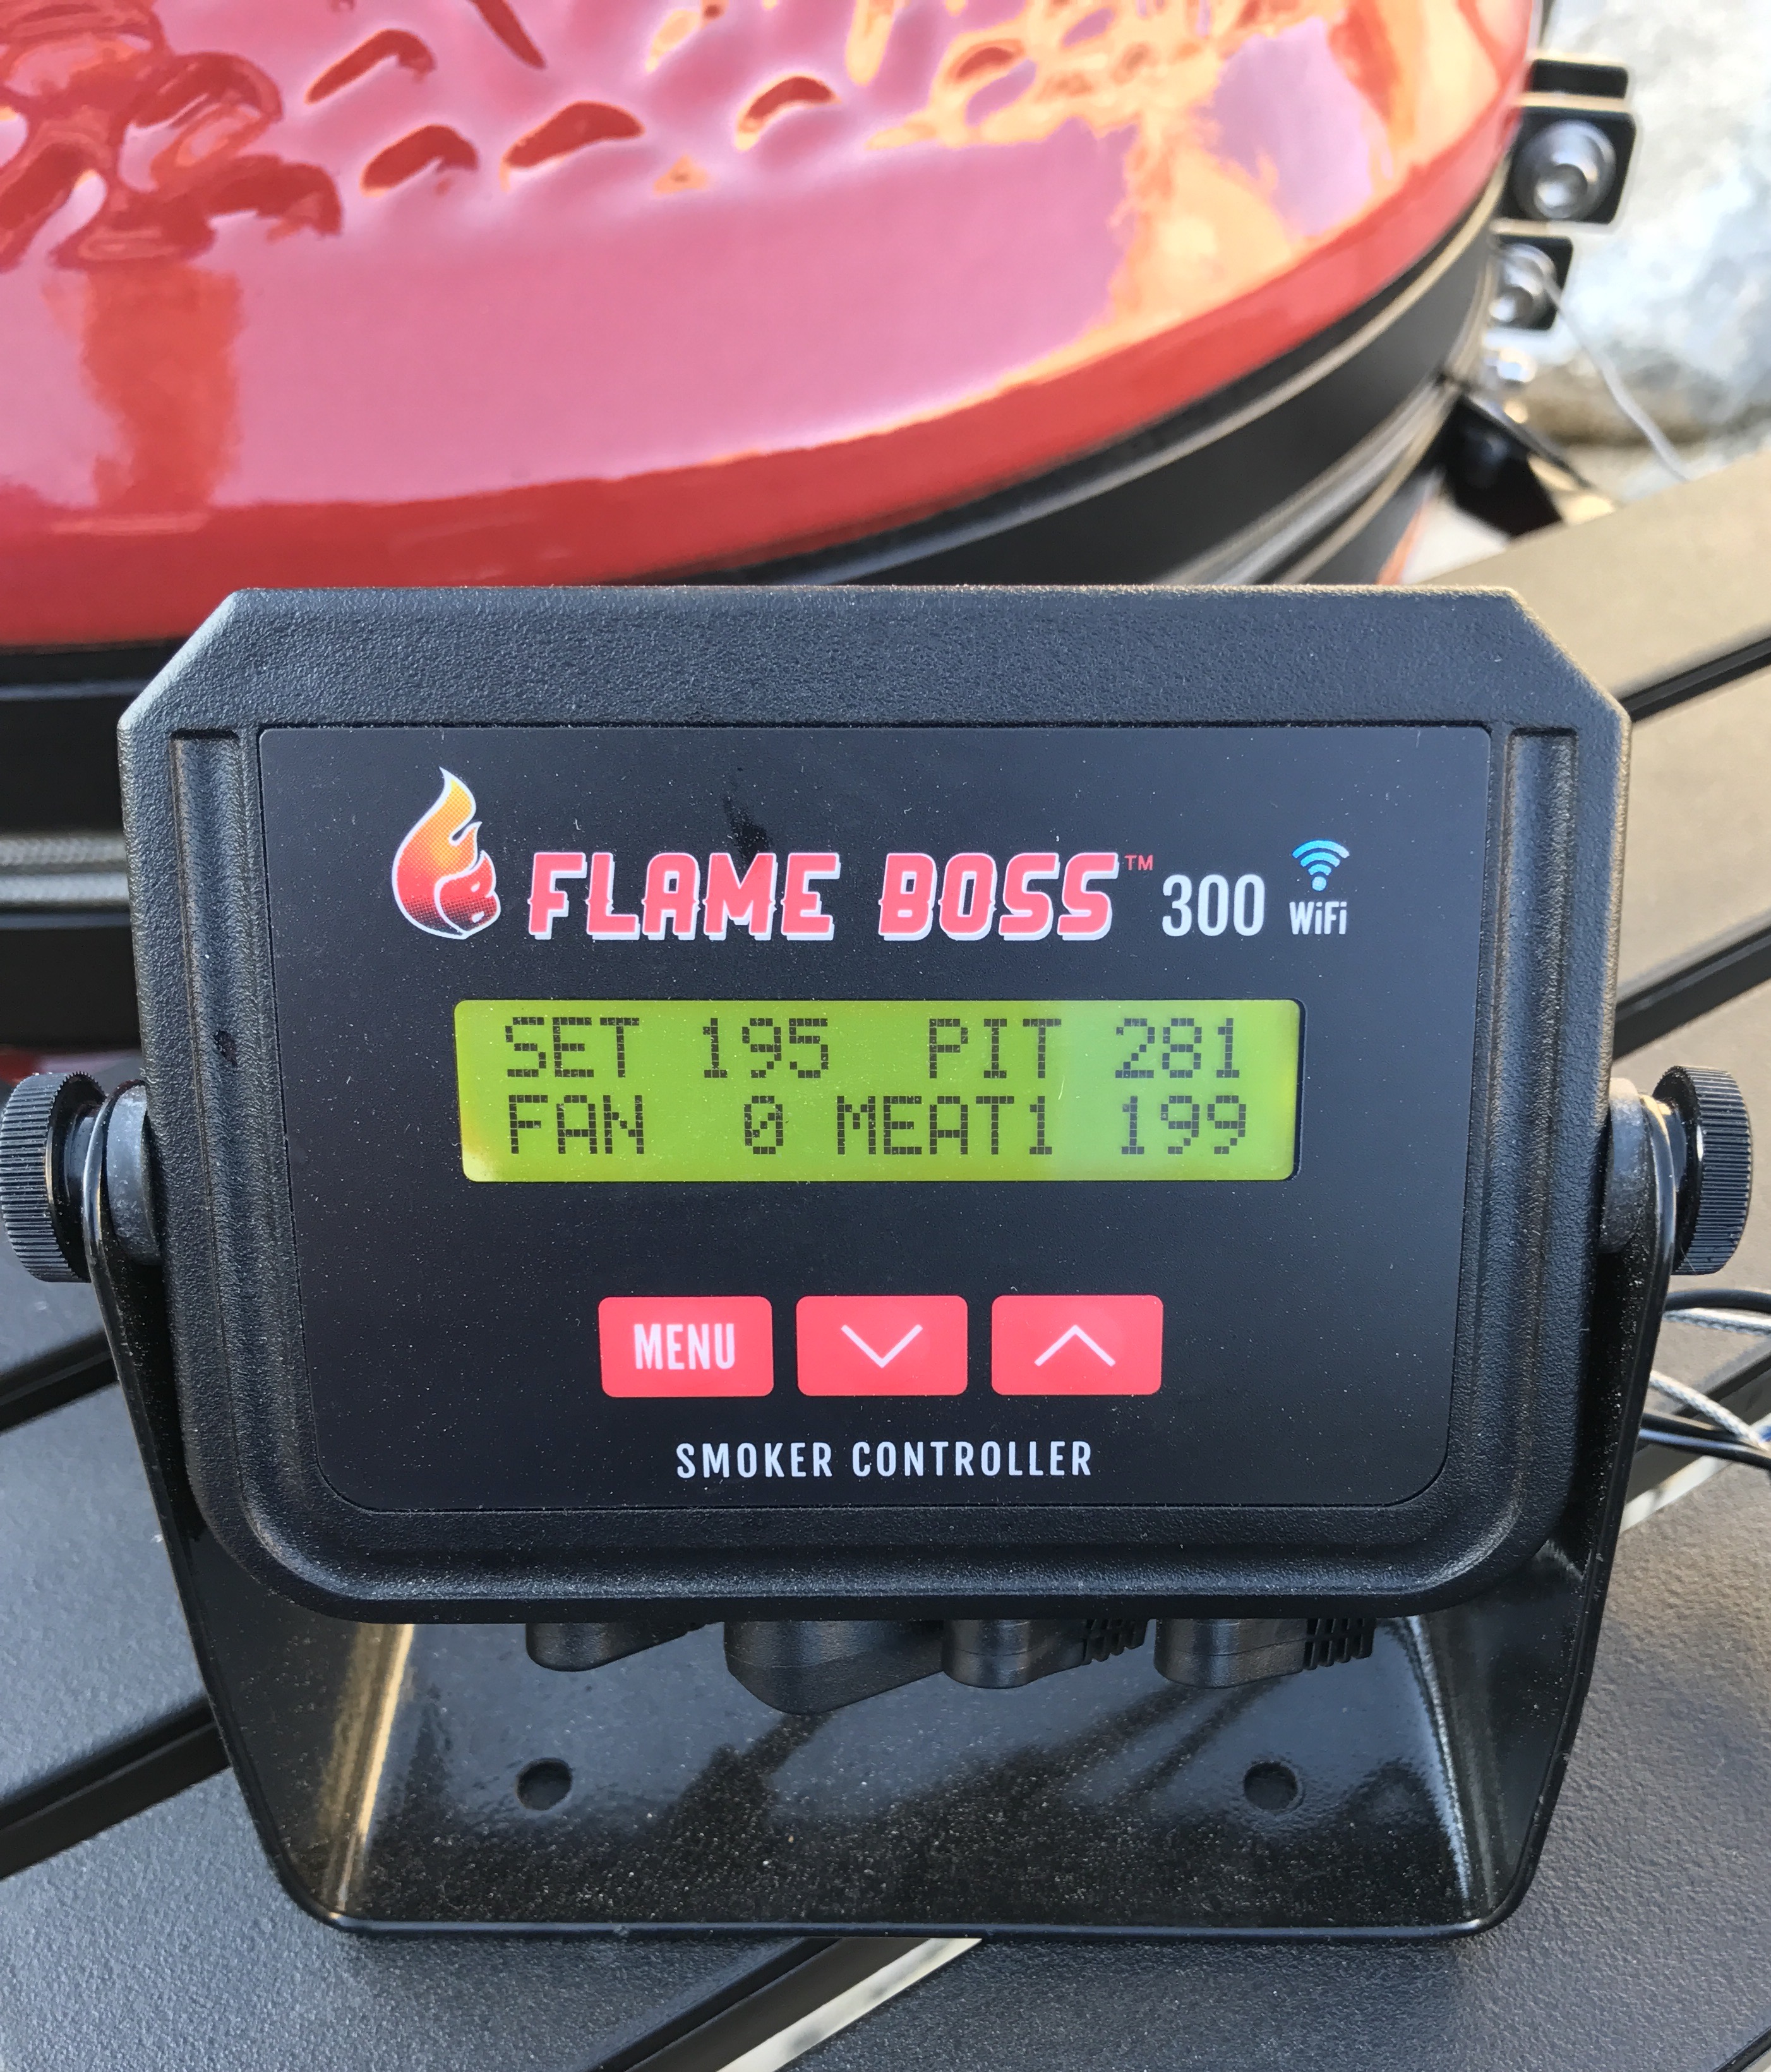 The Flame Boss 300 will revolutionize the way you smoke on your grill!